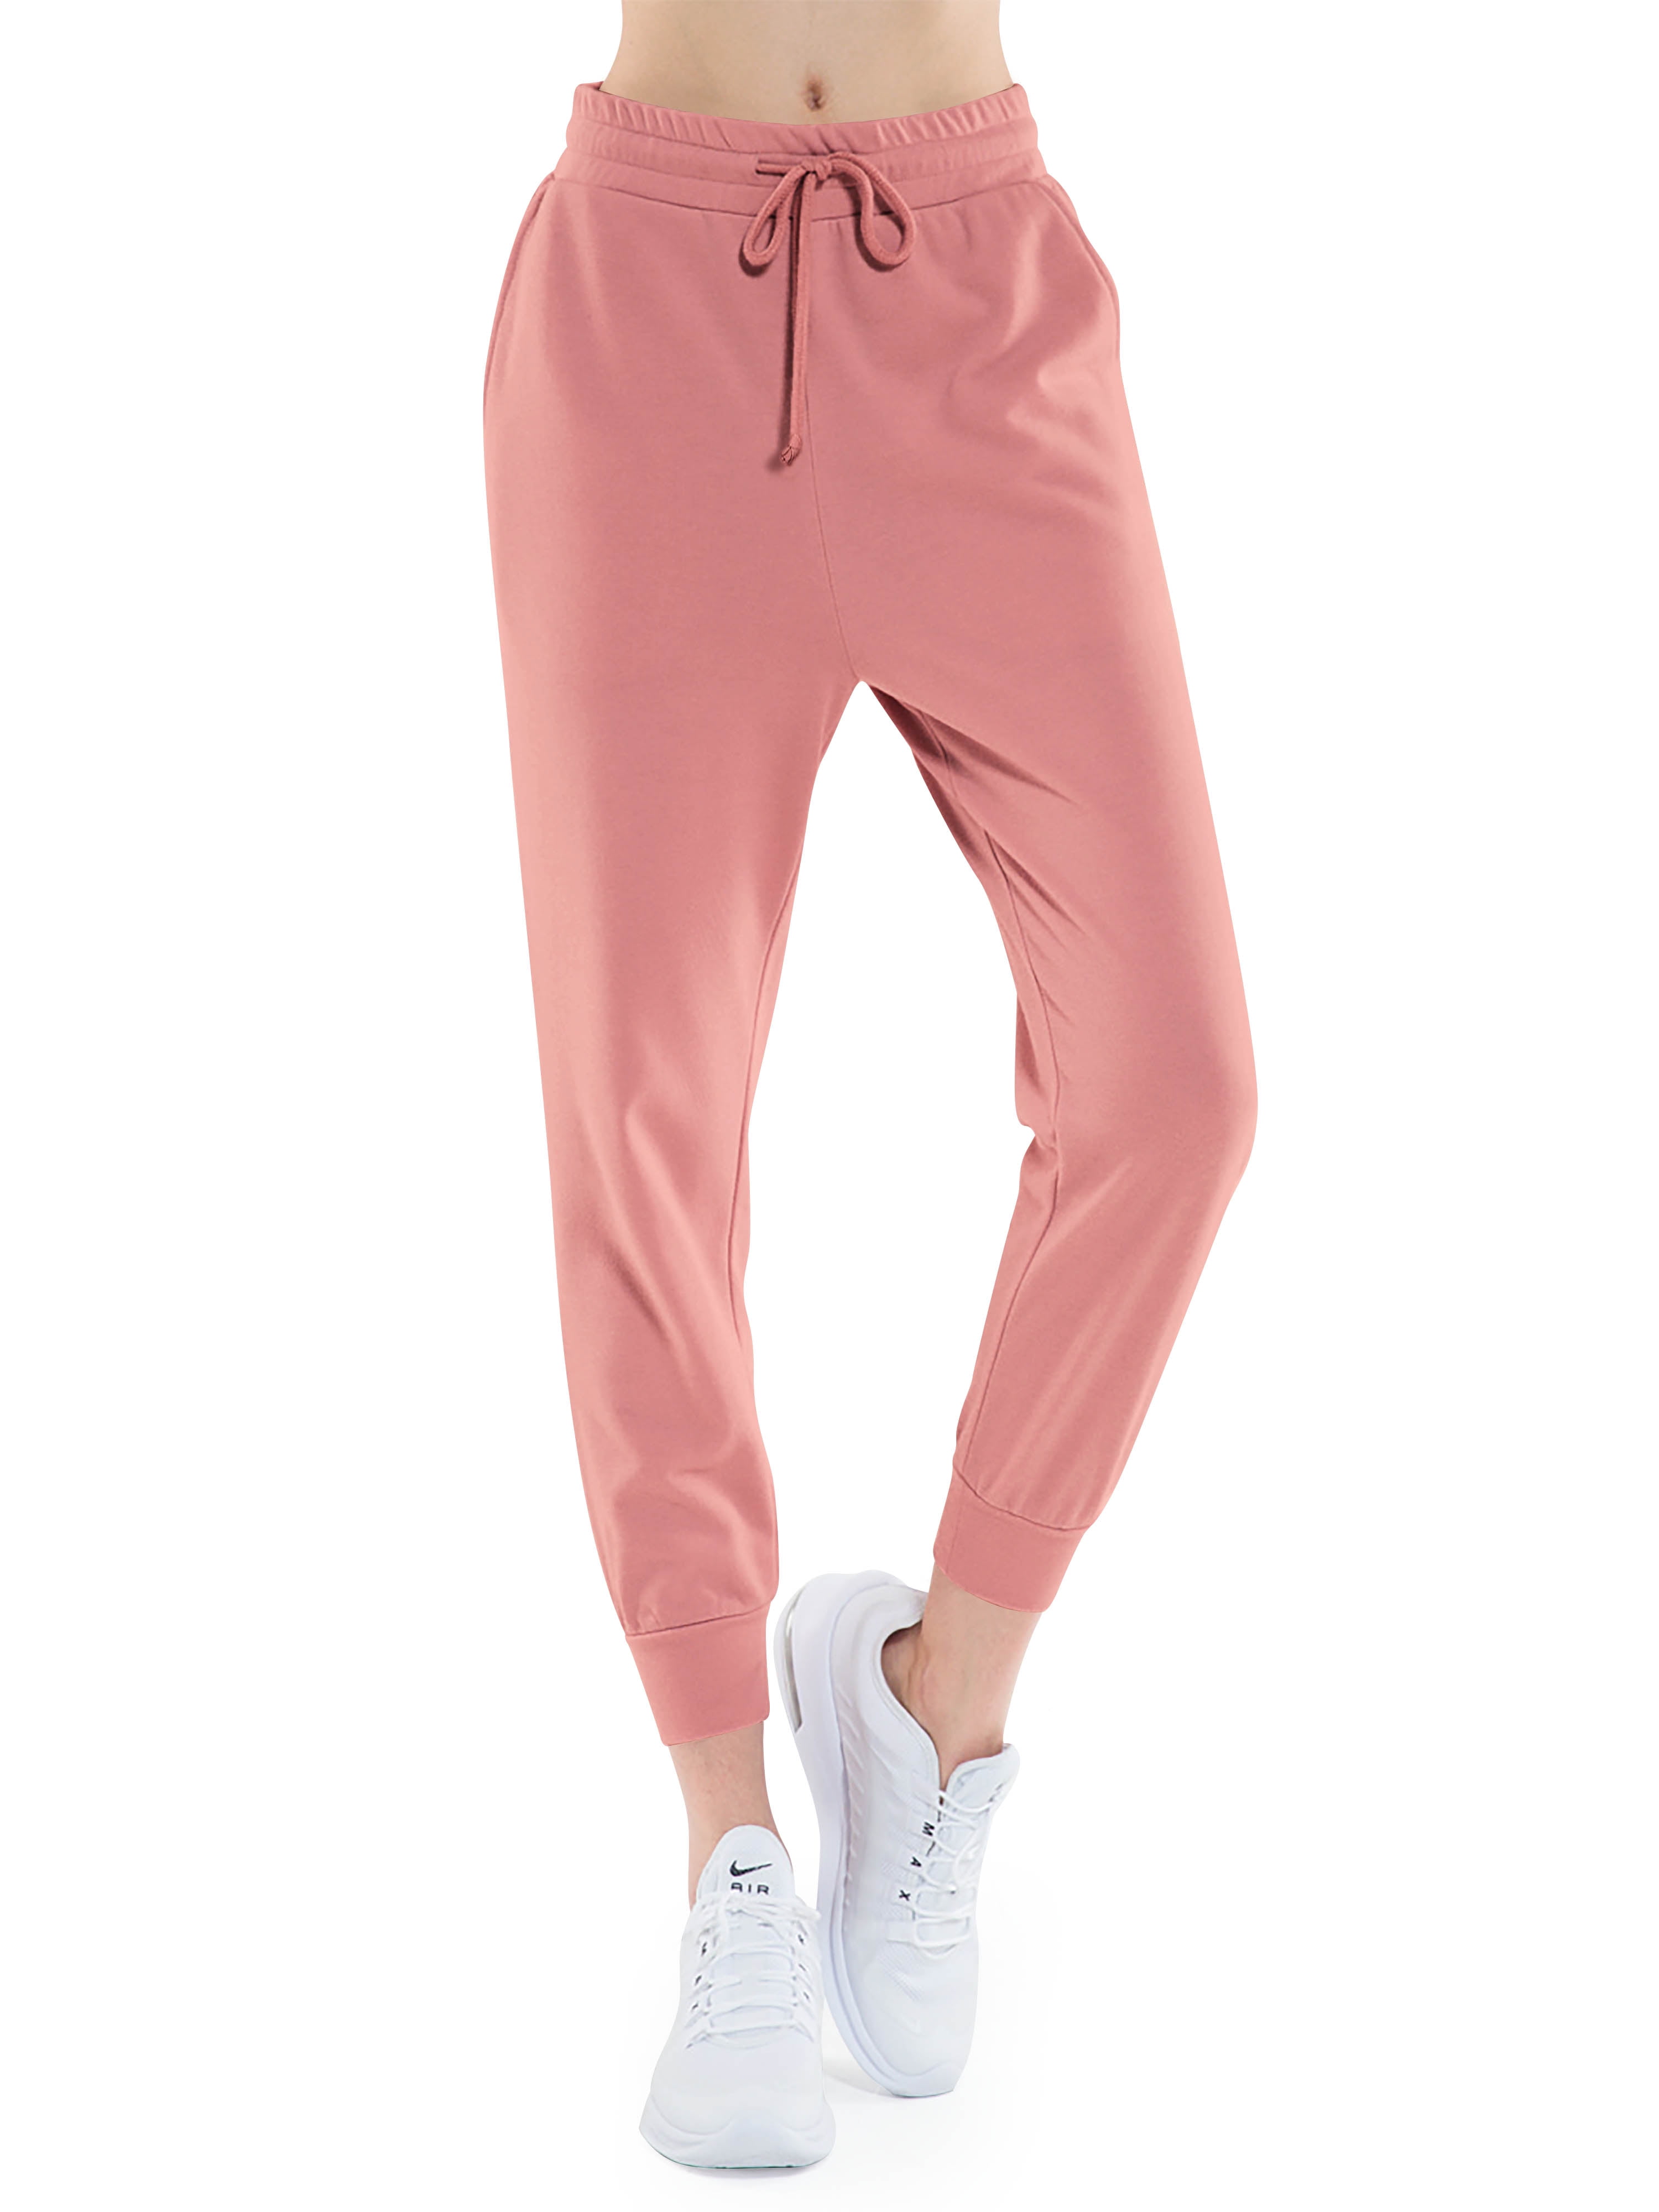 Hat and Beyond Women's Casual French Terry Lightweight Sweatpants with ...